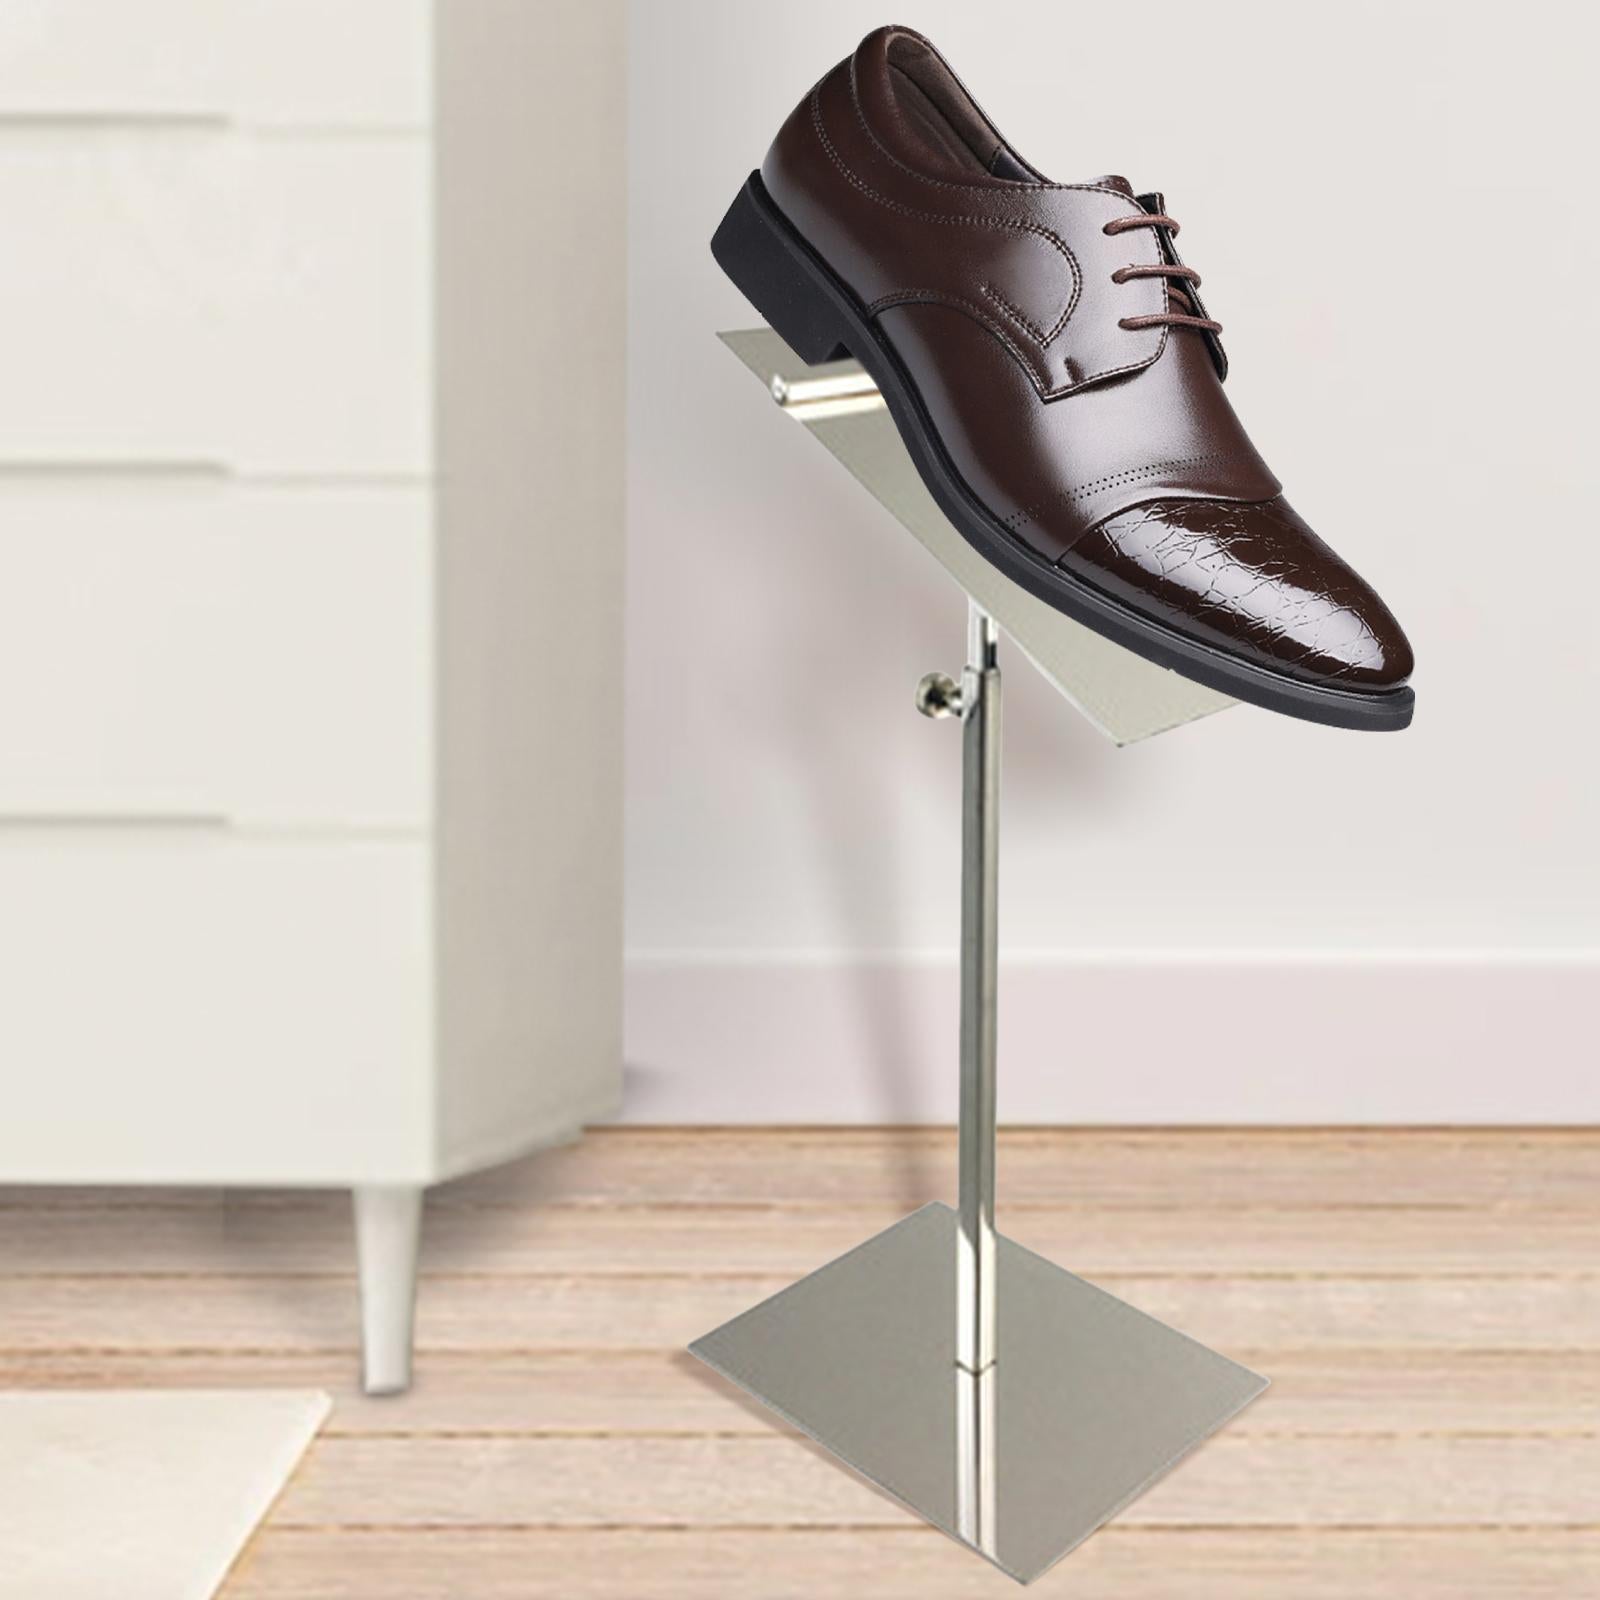 Stainless Steel Shoe Display Rack Stands for Display Clothing Shopping Mirror high shelf